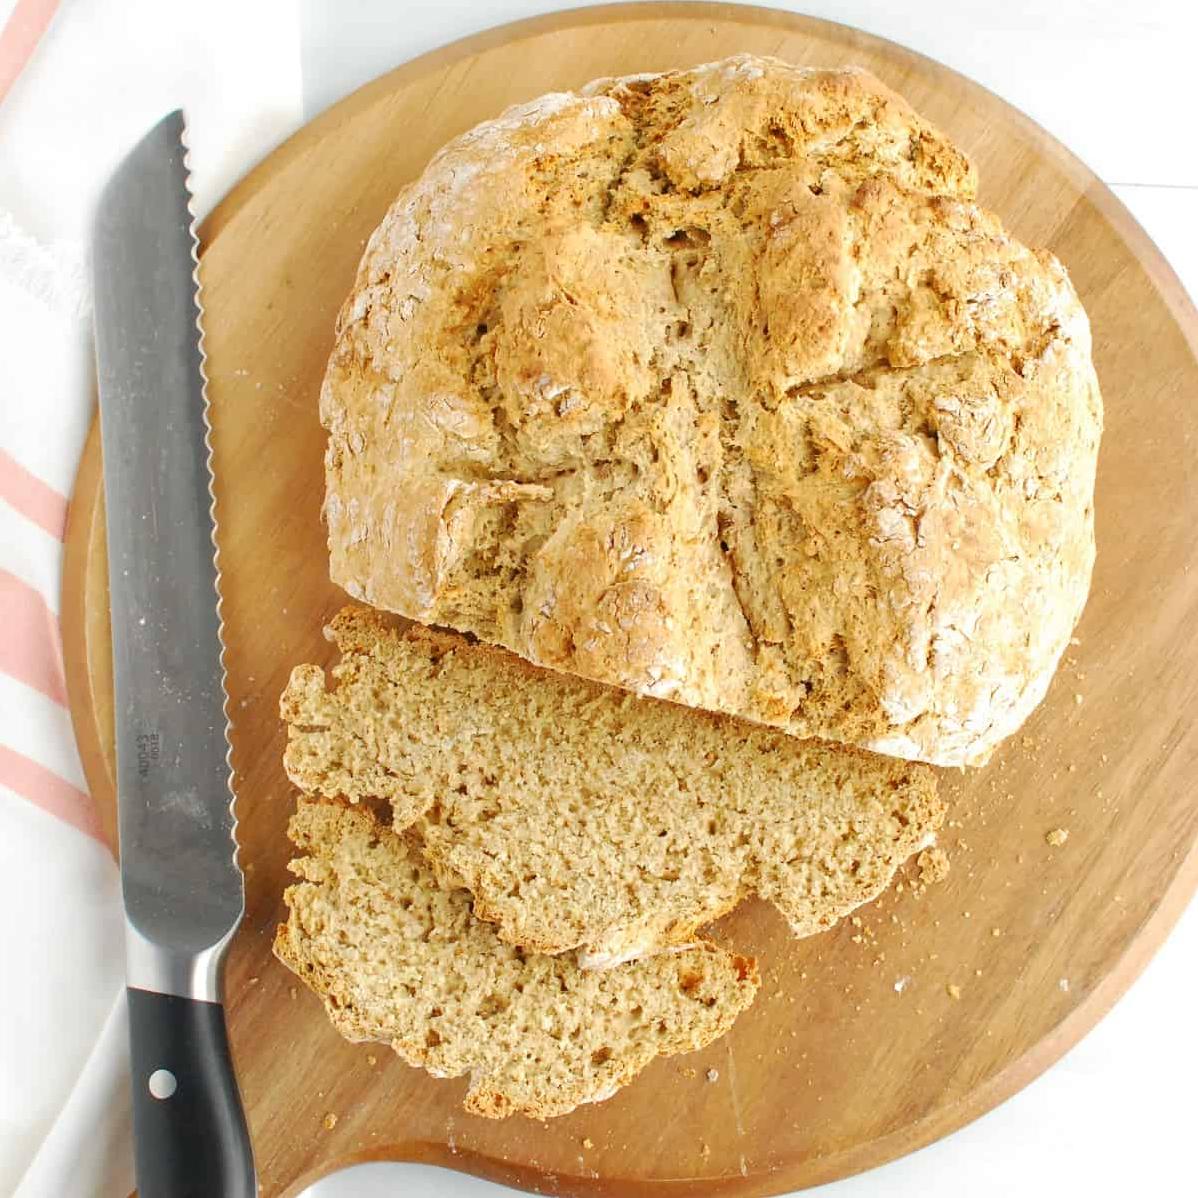  Slather some butter on a slice of Chrissy's Irish Soda Bread and indulge